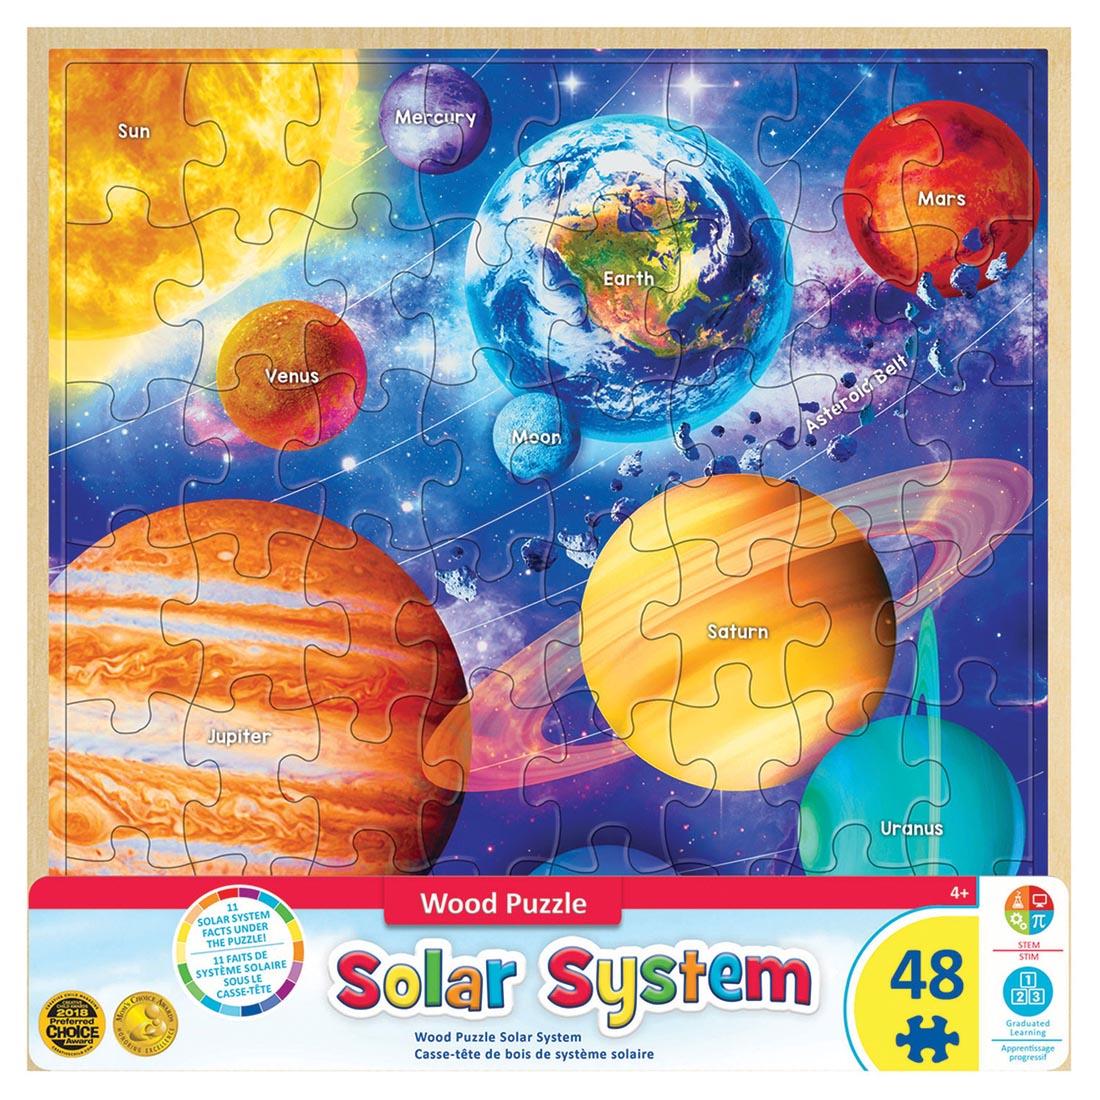 Solar System 48-Piece Wooden Puzzle By MasterPieces